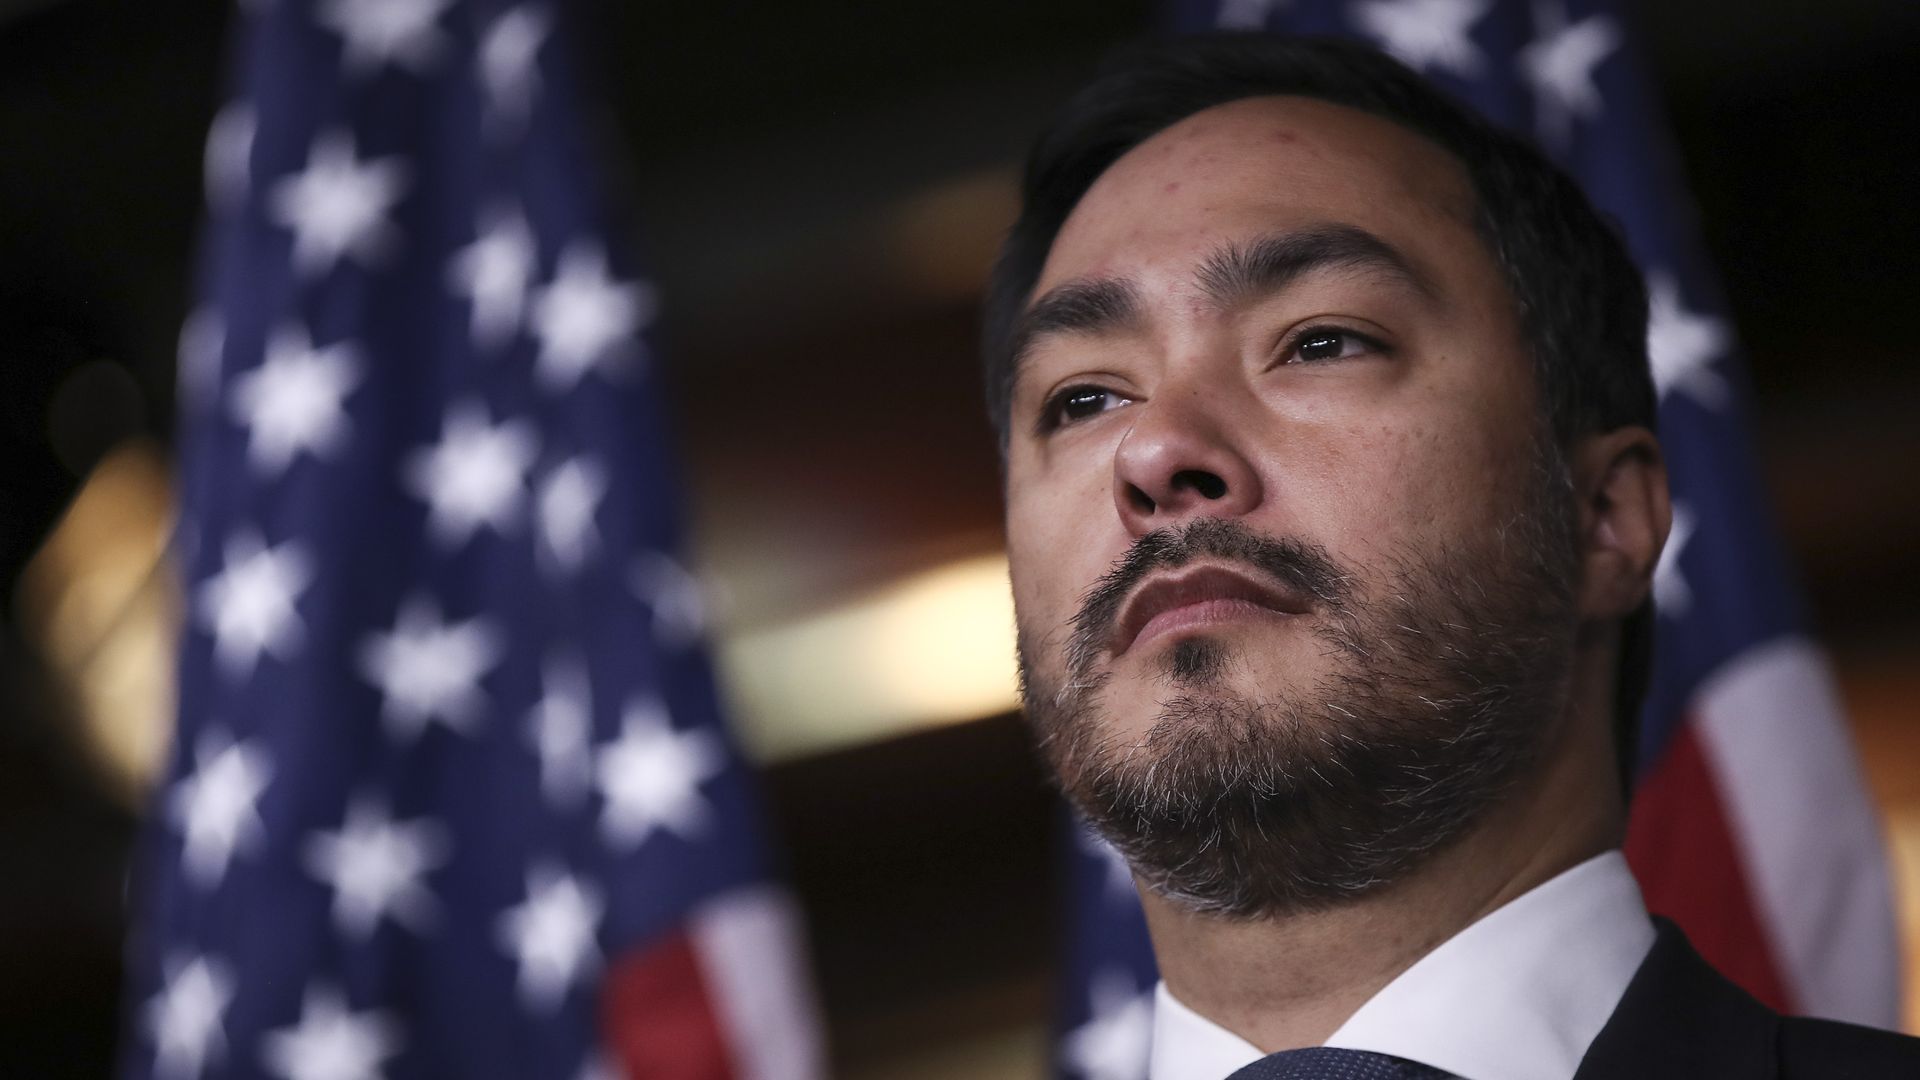  U.S. Rep. Joaquin Castro (D-TX) stands during a news conference to discuss the Supreme Court case involving DACA at the U.S. Capitol.